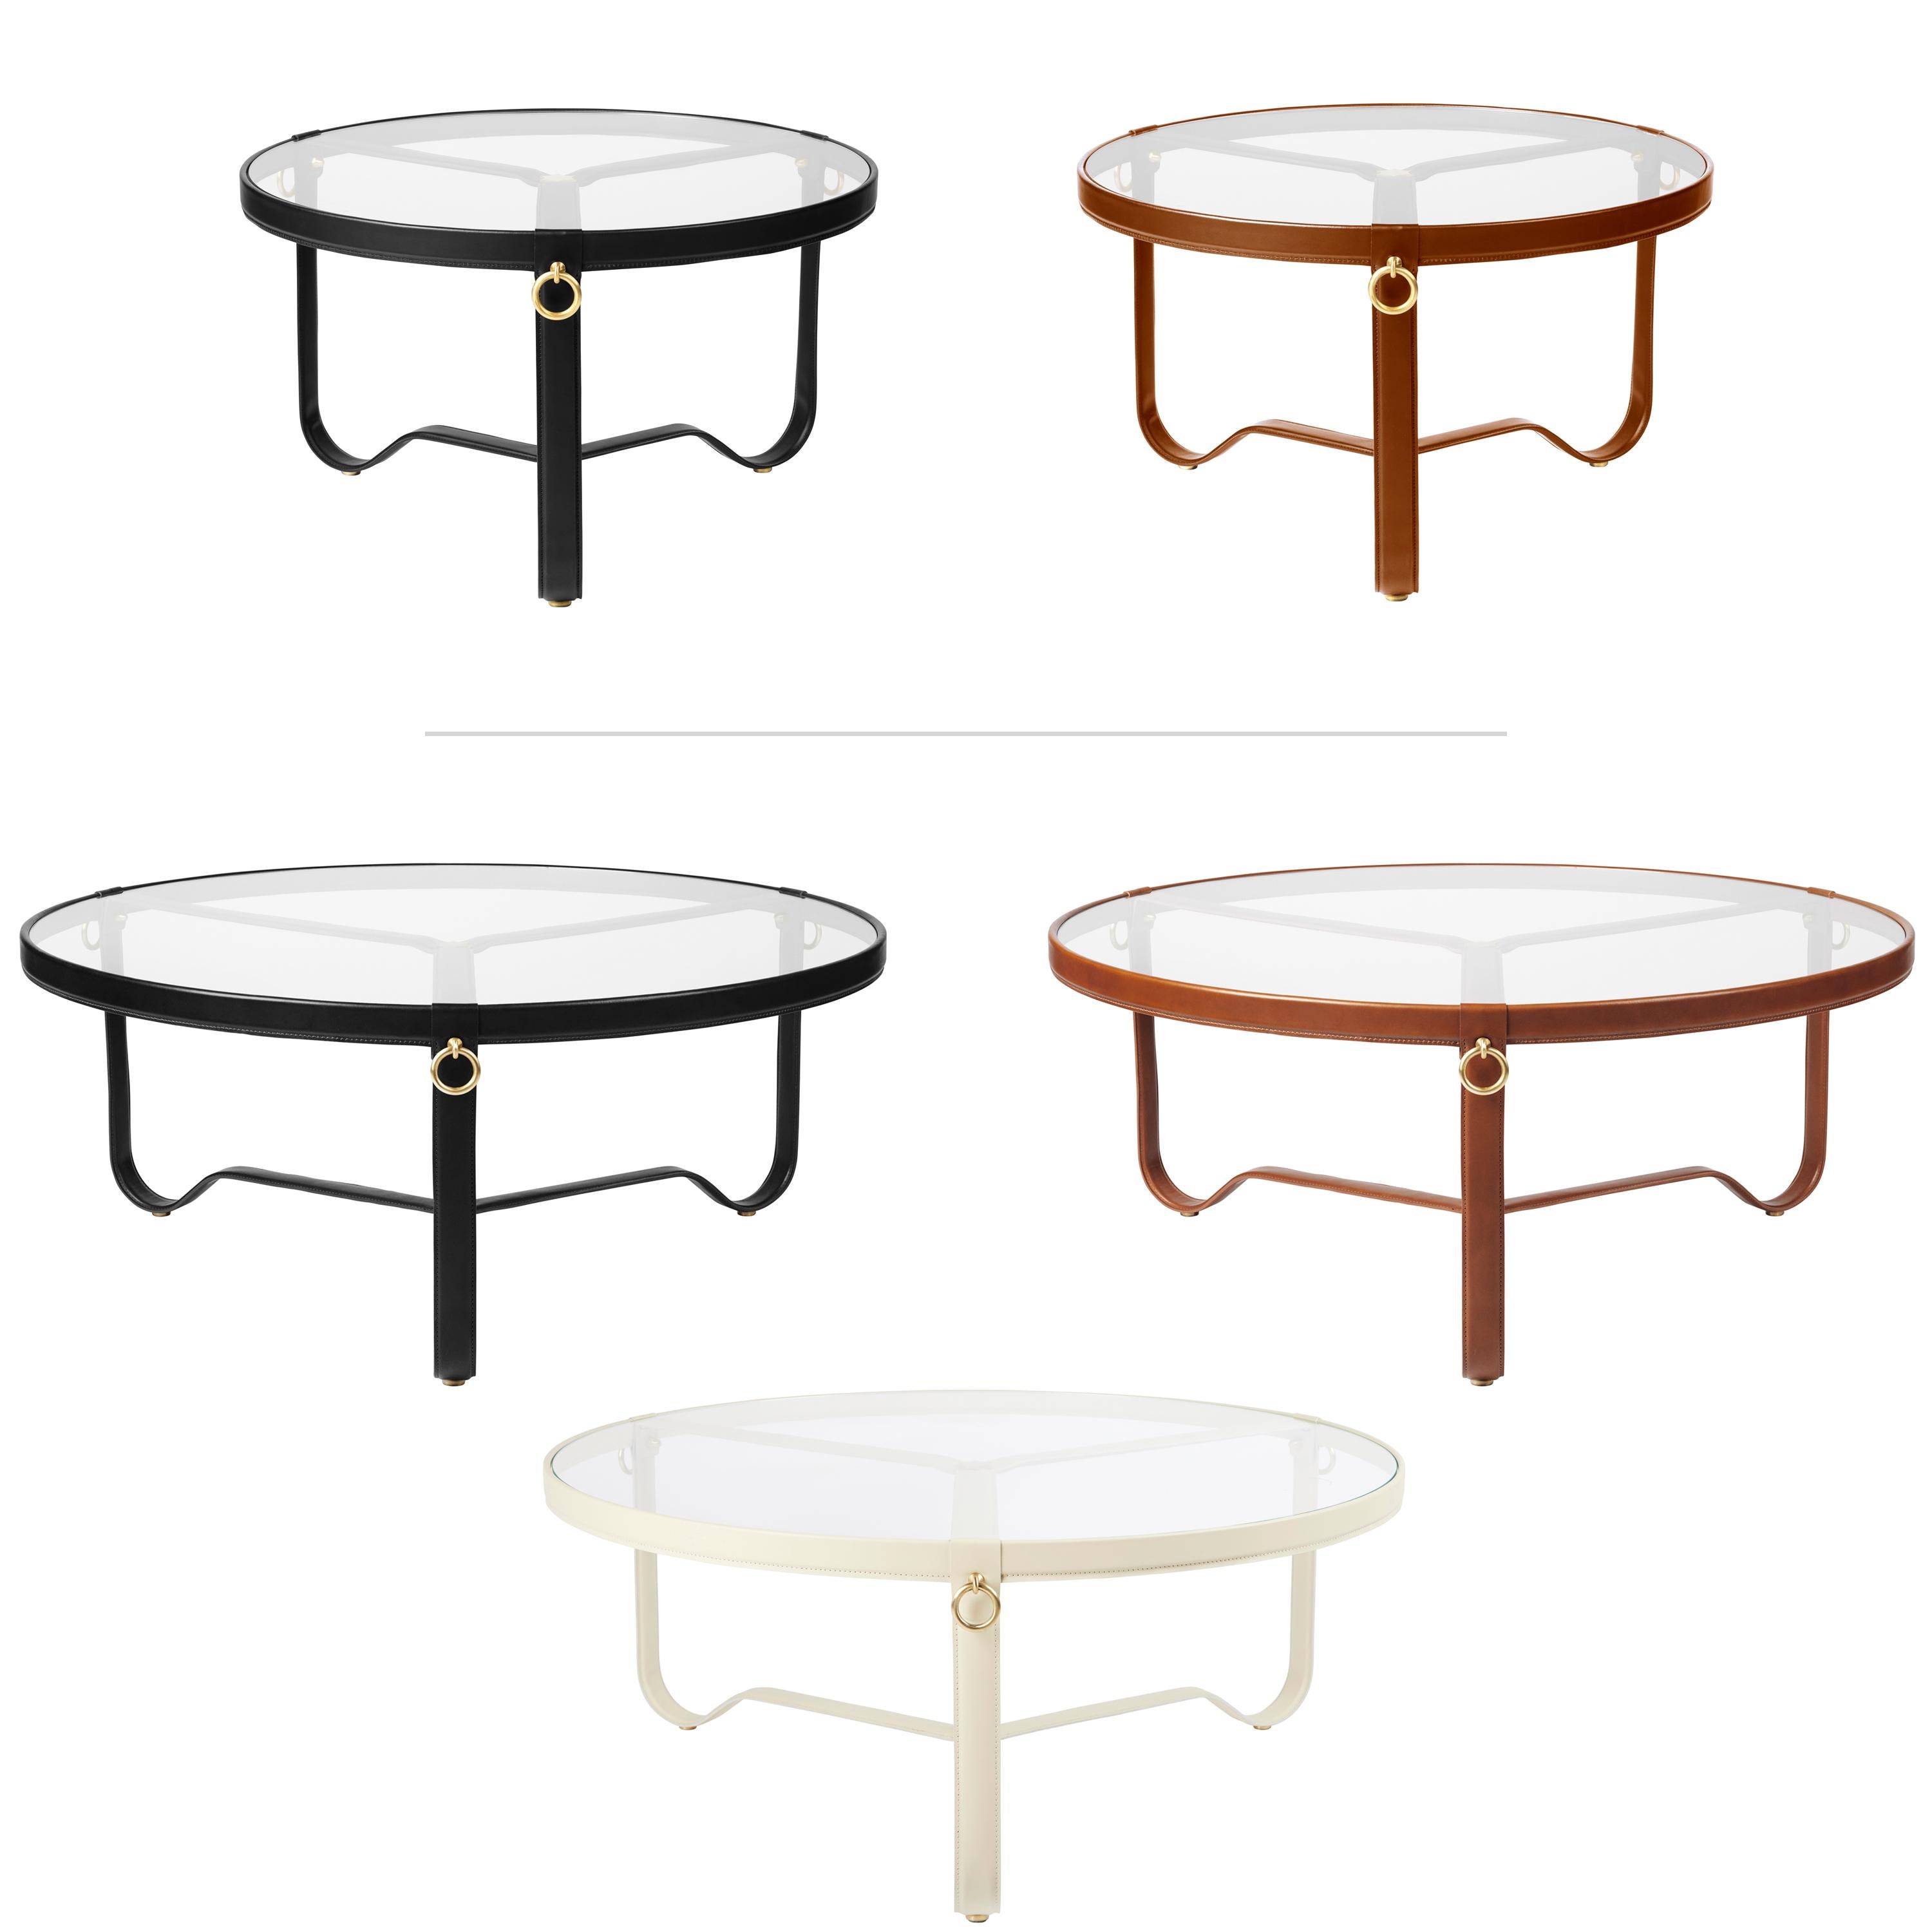 Danish Large Jacques Adnet 'Circulaire' Glass and Cream Leather Coffee Table for GUBI For Sale